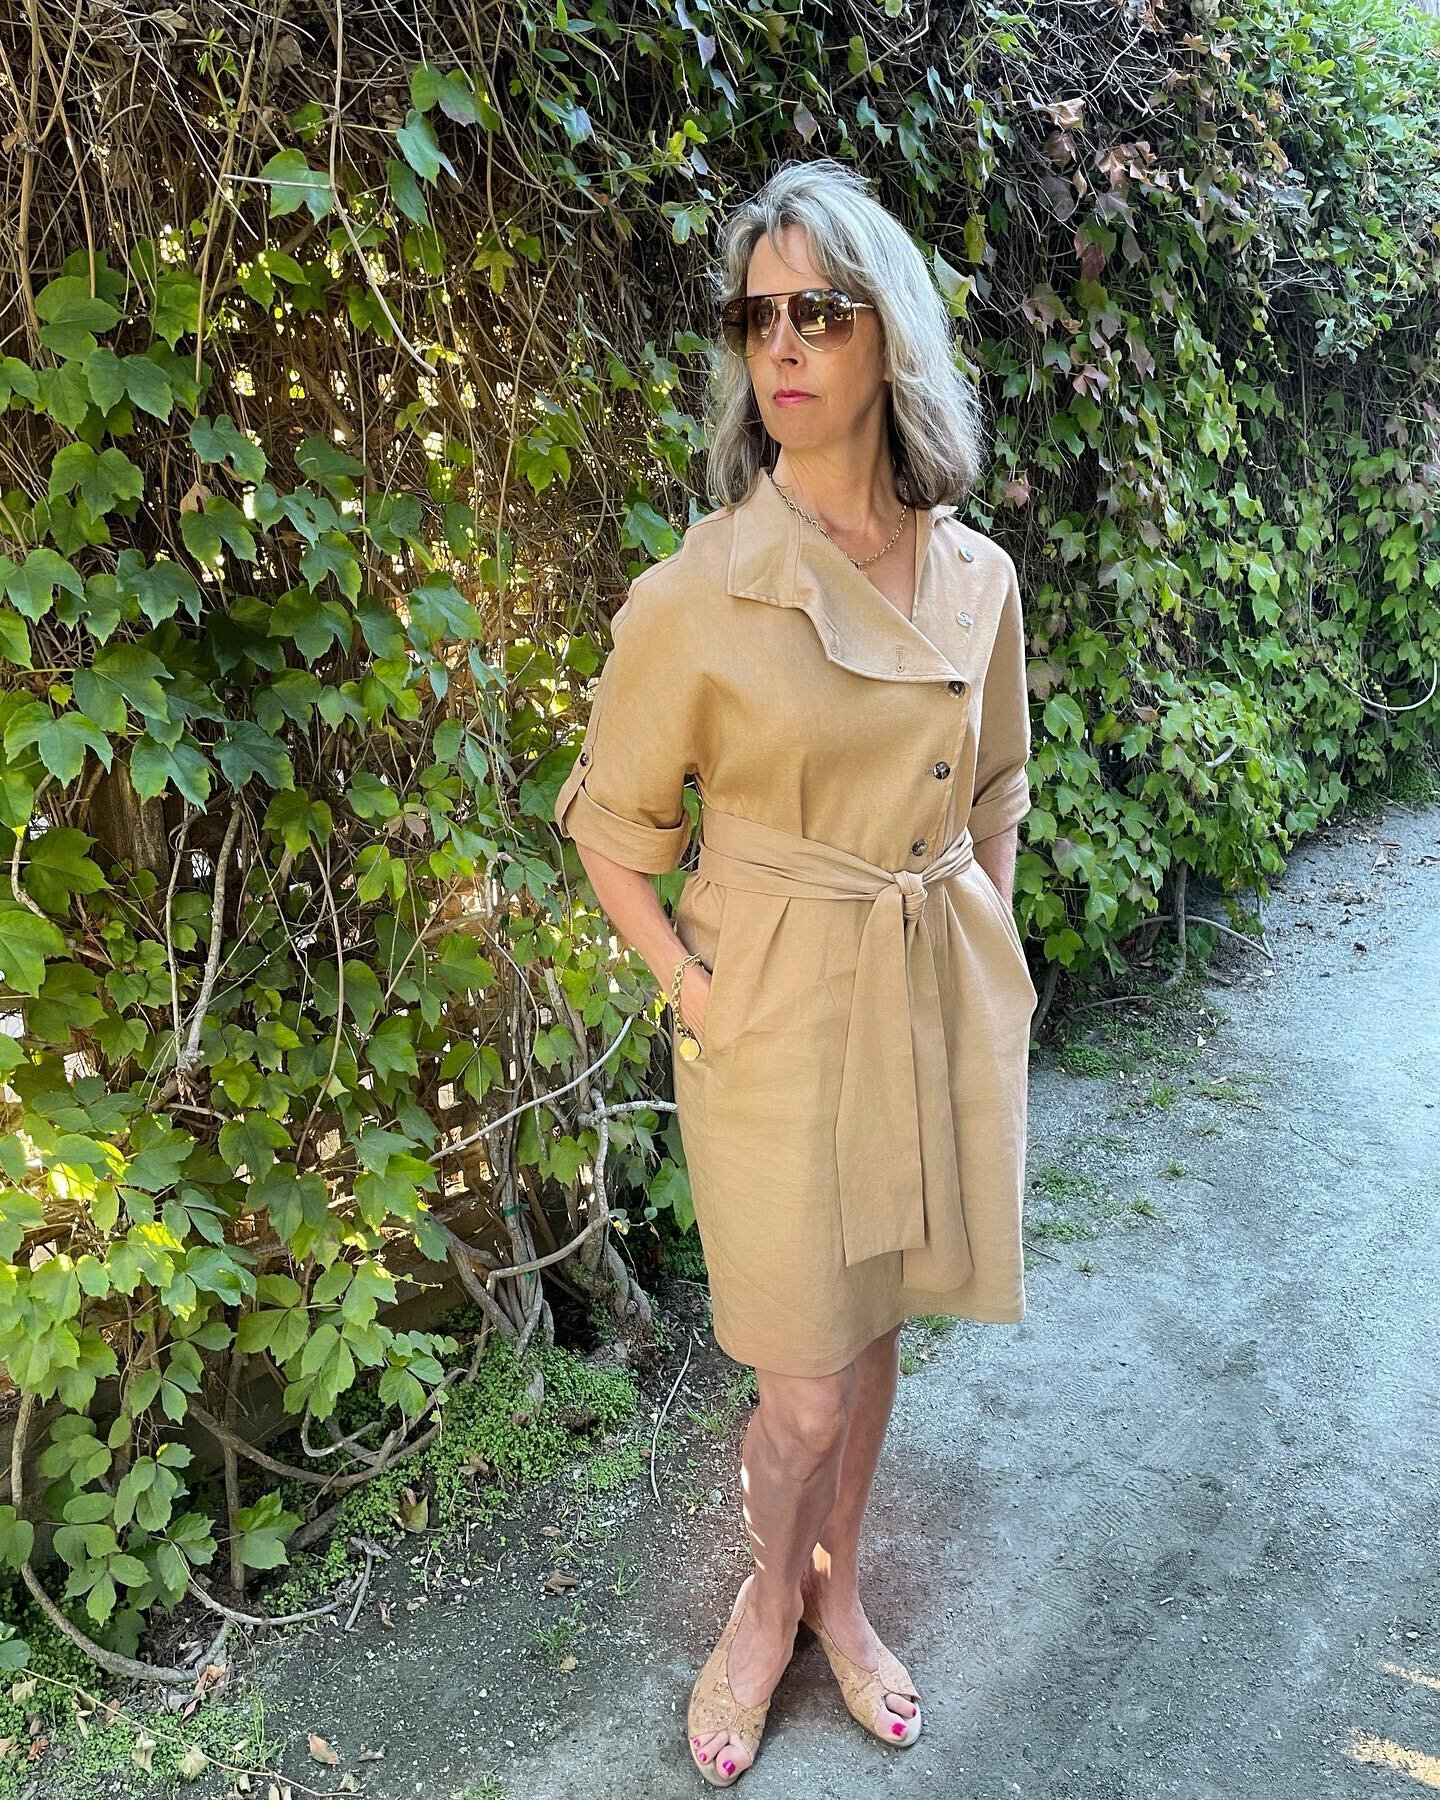 I rely on boutiques for timeless, versatile pieces. Fashion should take you anywhere. With an accommodating fit, this dress from Shu Shu's Clothing and Accessories will be in my wardrobe for many years. @shushusllc #europeanfashion #versatile #linend